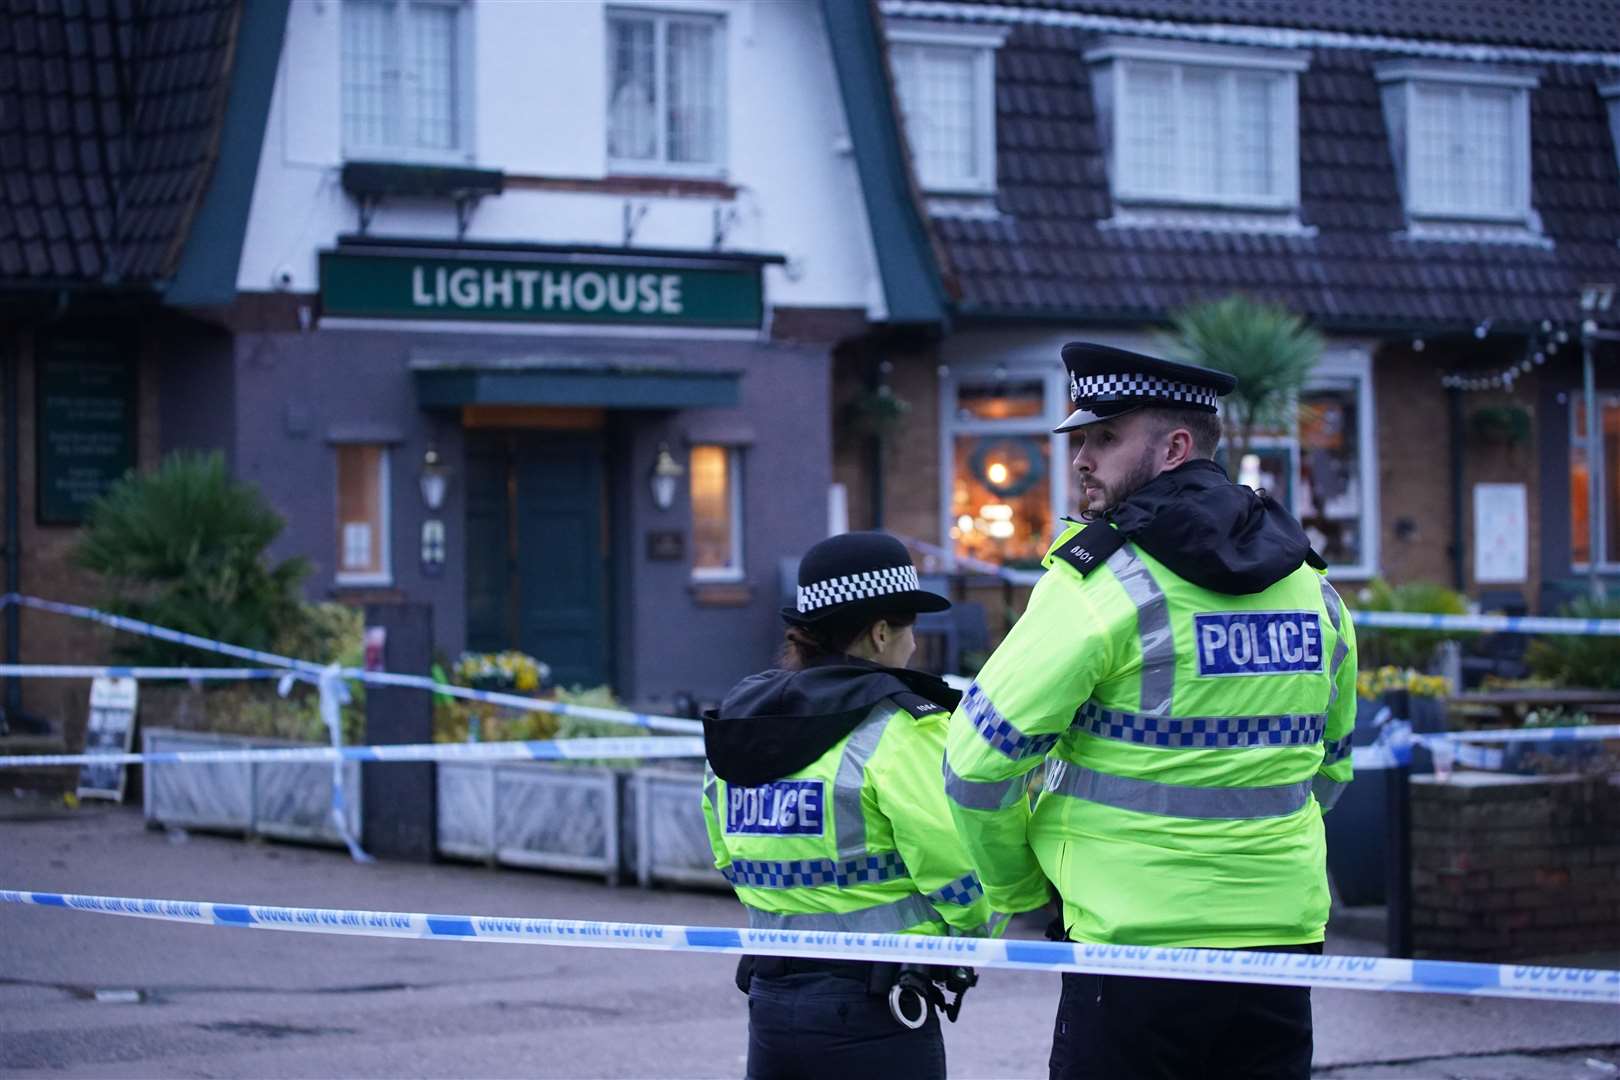 Police officers on duty at the Lighthouse Inn in Wallasey Village (Peter Byrne/PA)